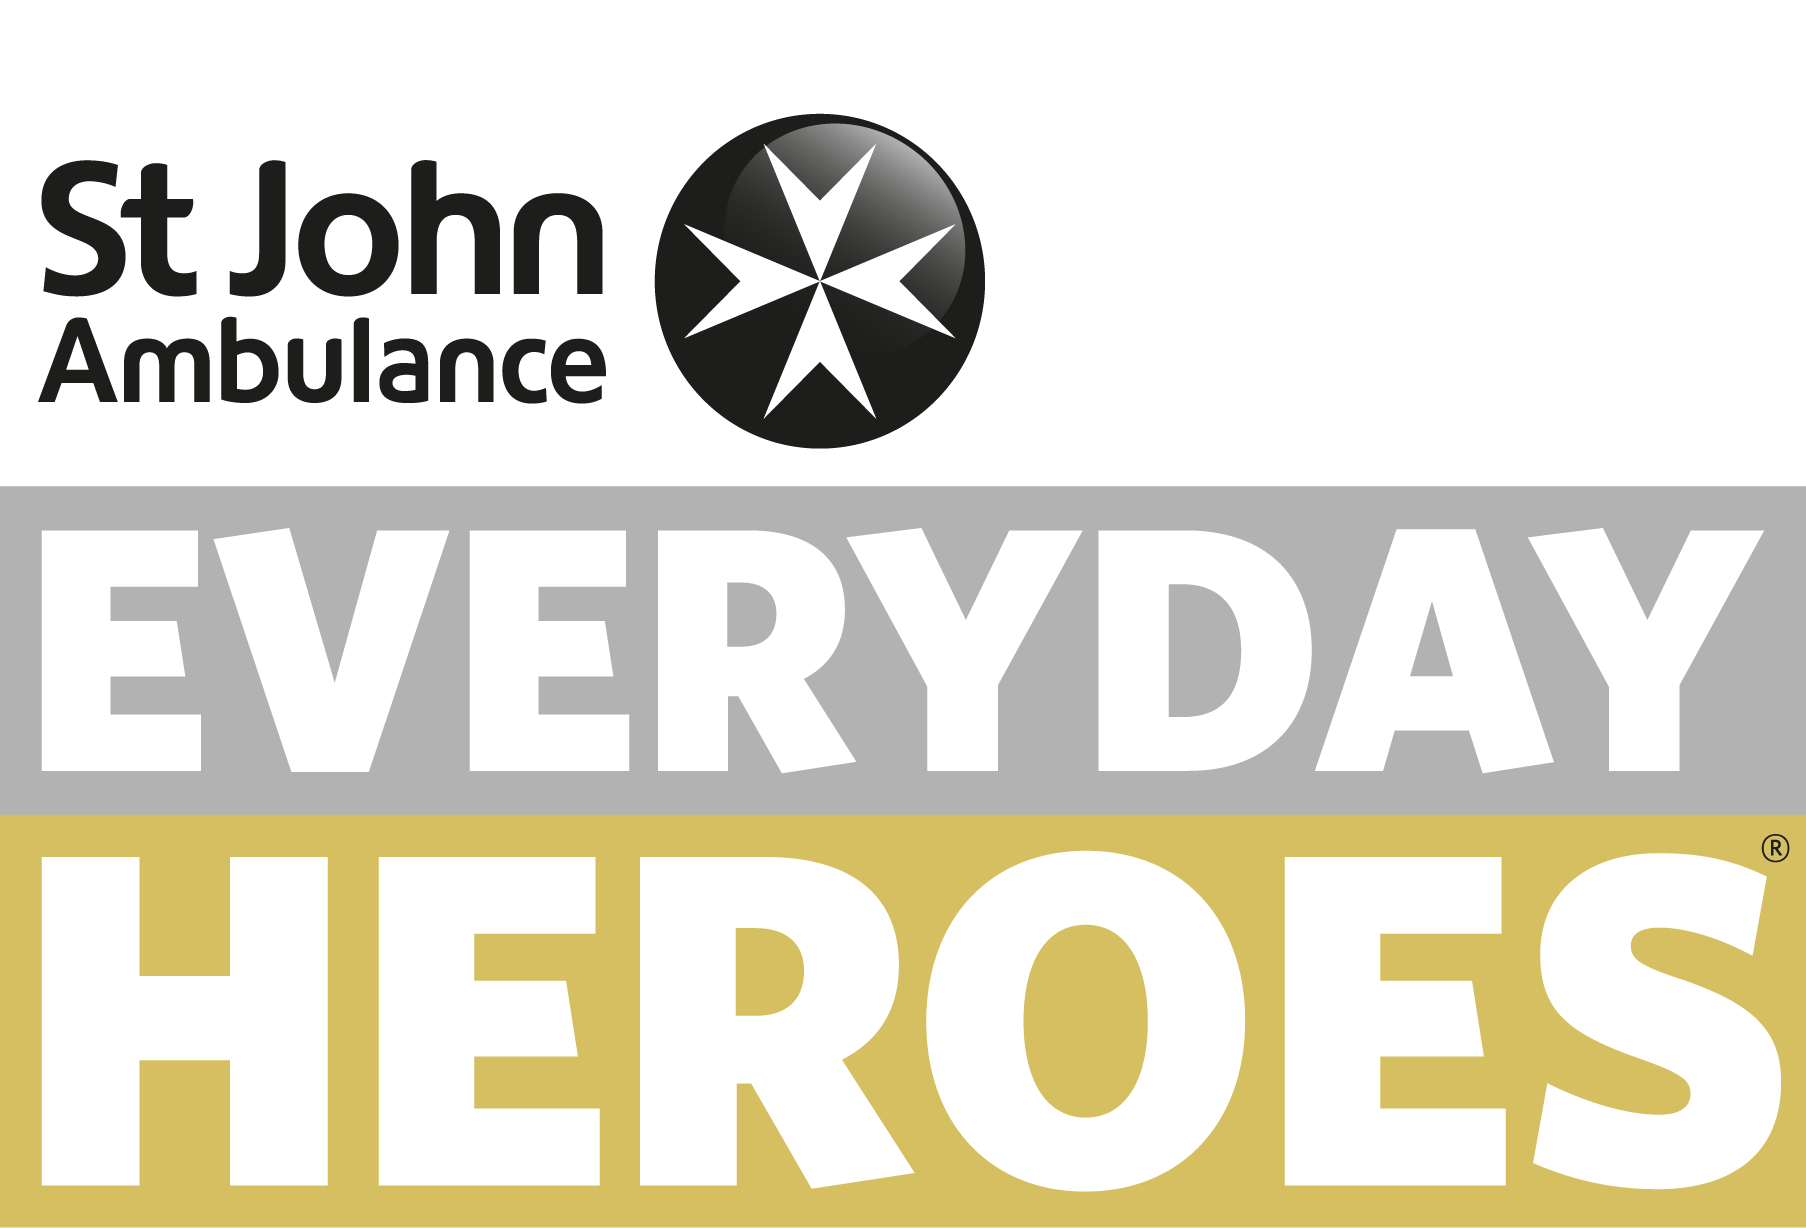 Awards open for St John Ambulance's Everyday Heroes